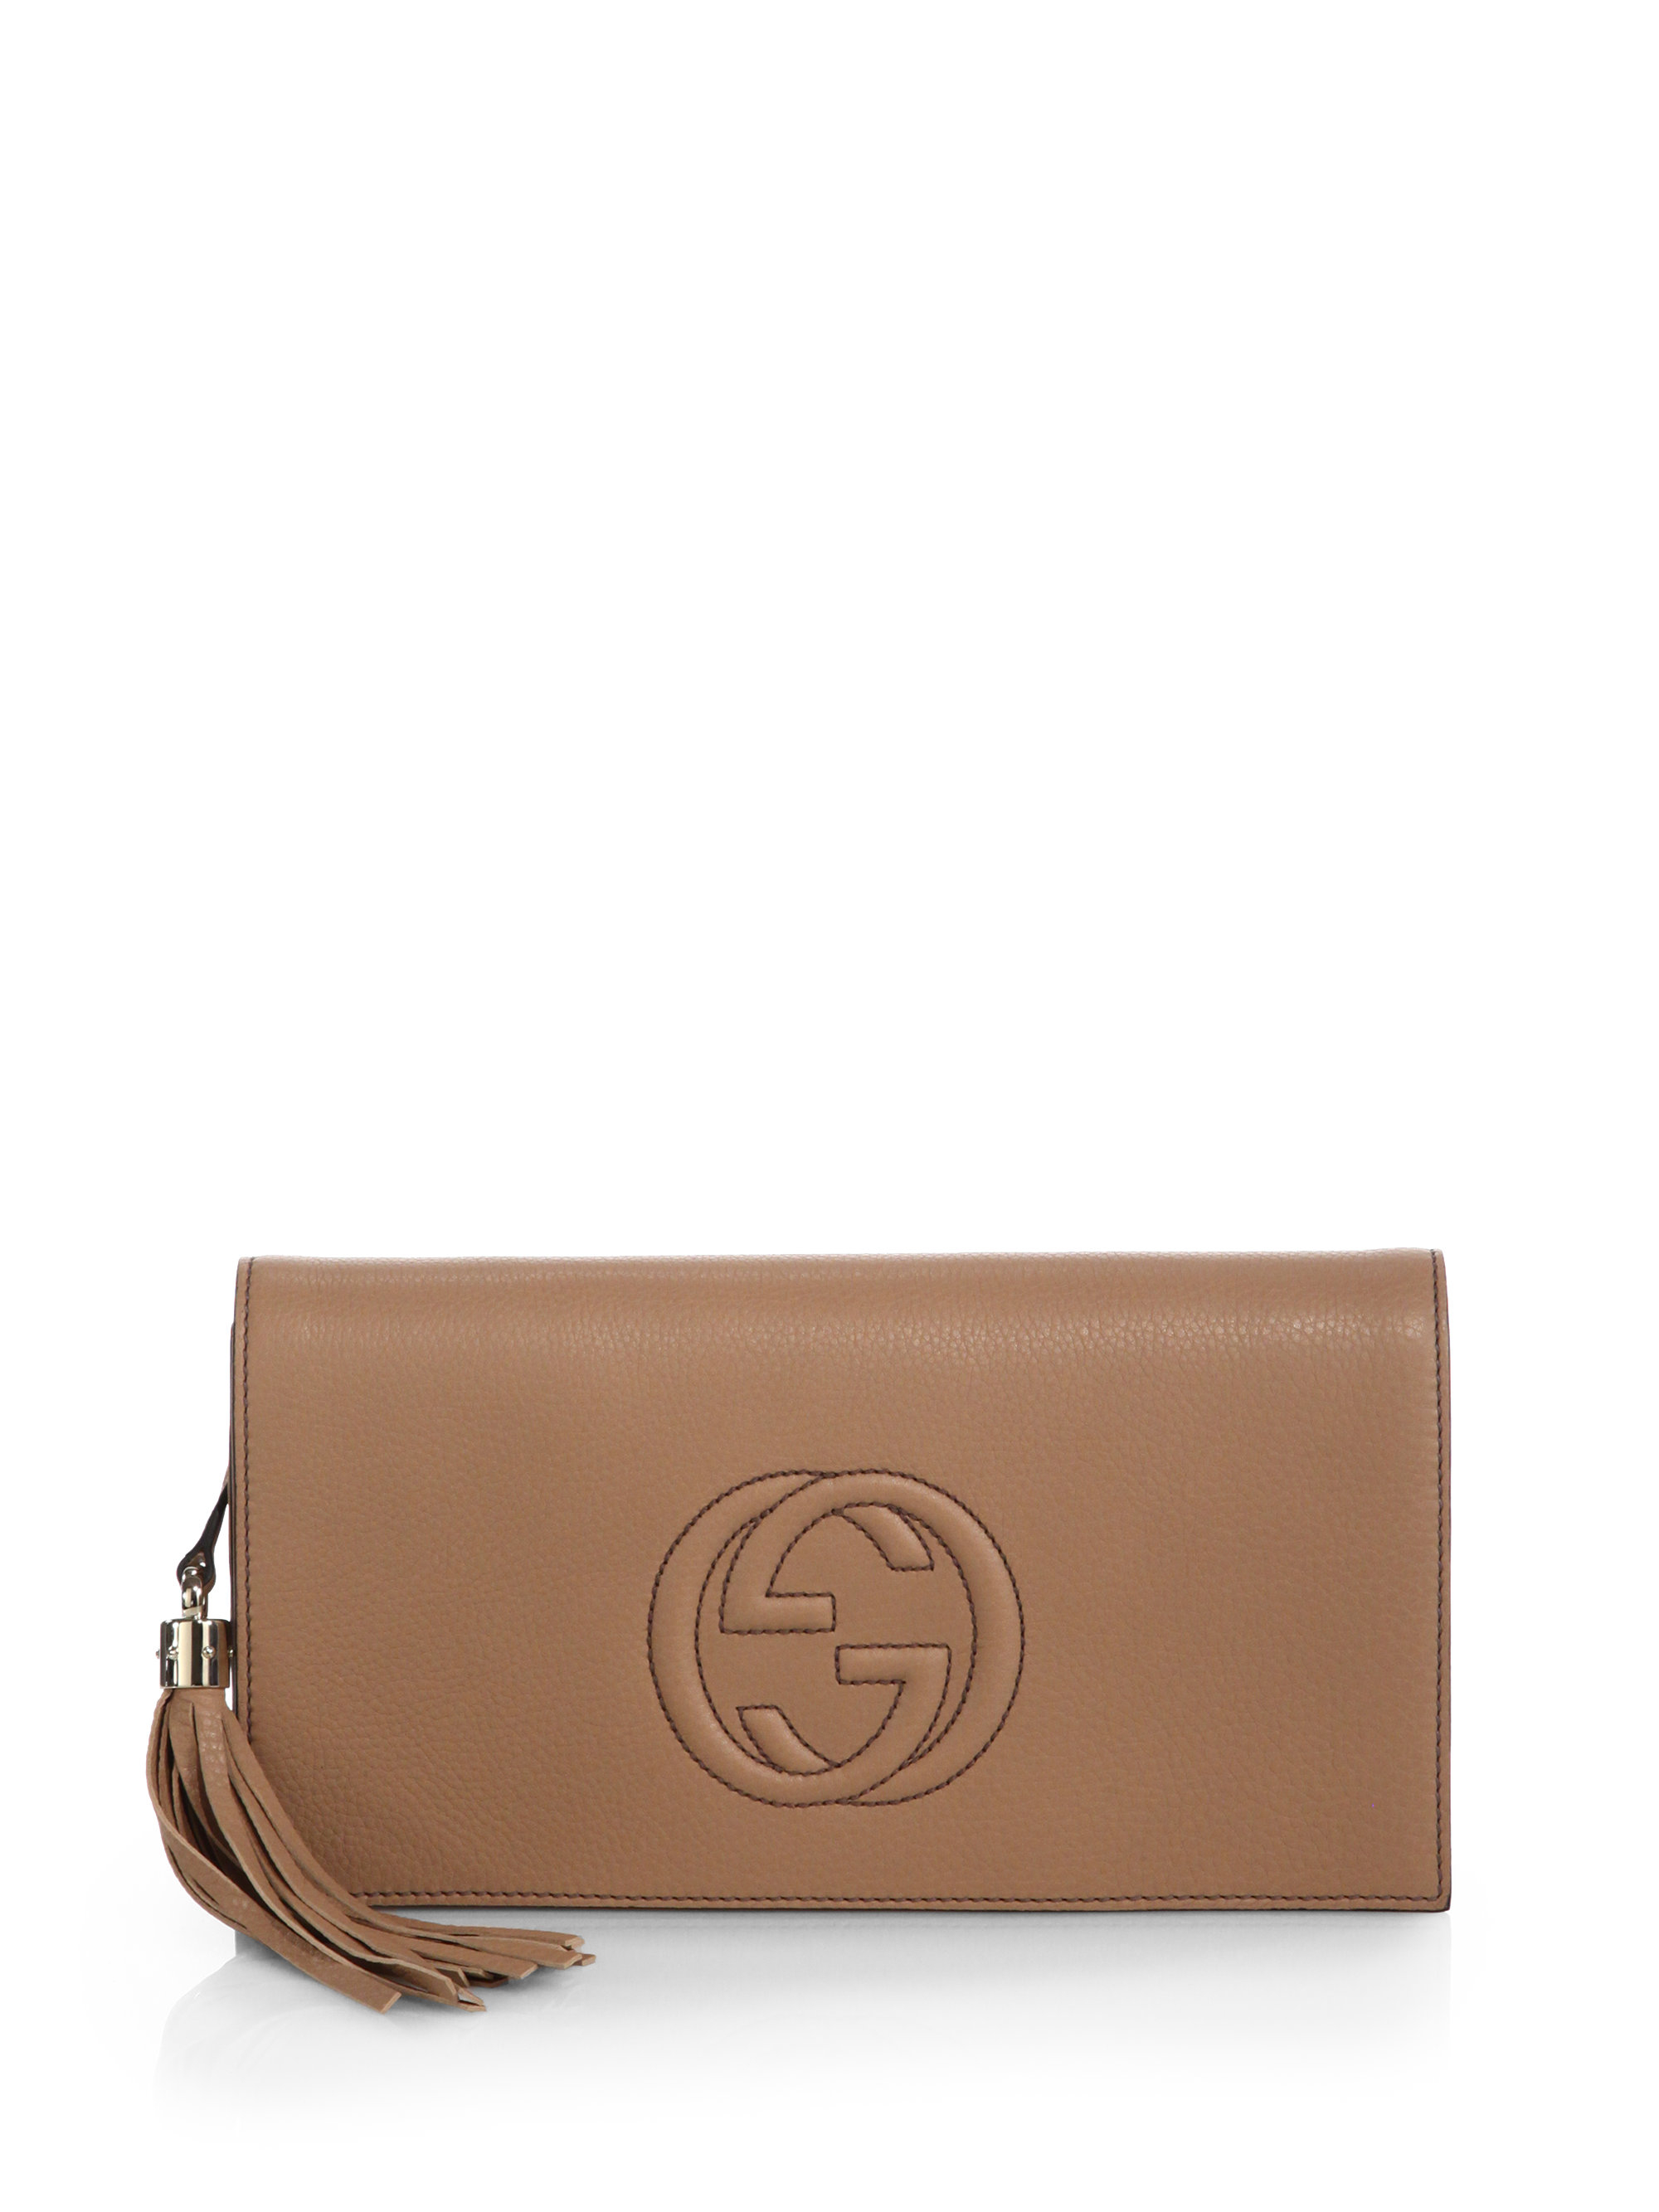 Lyst - Gucci Soho Leather Clutch in Natural